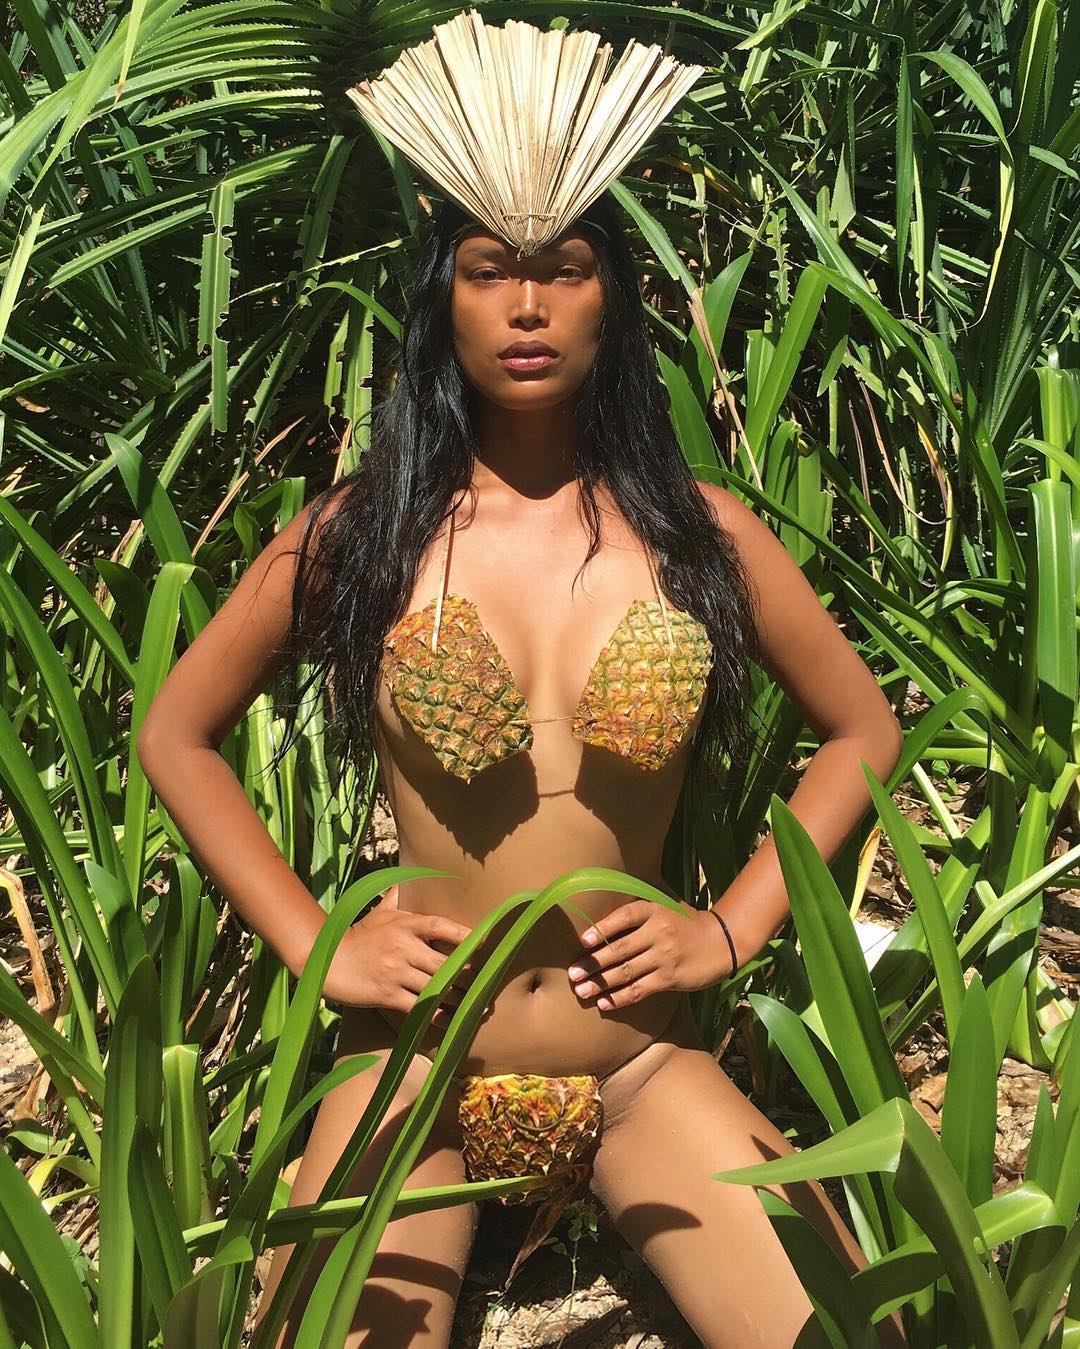 Transgender Playmate Geena Rocero Makes Swimsuits Out of Fruits and Leaves